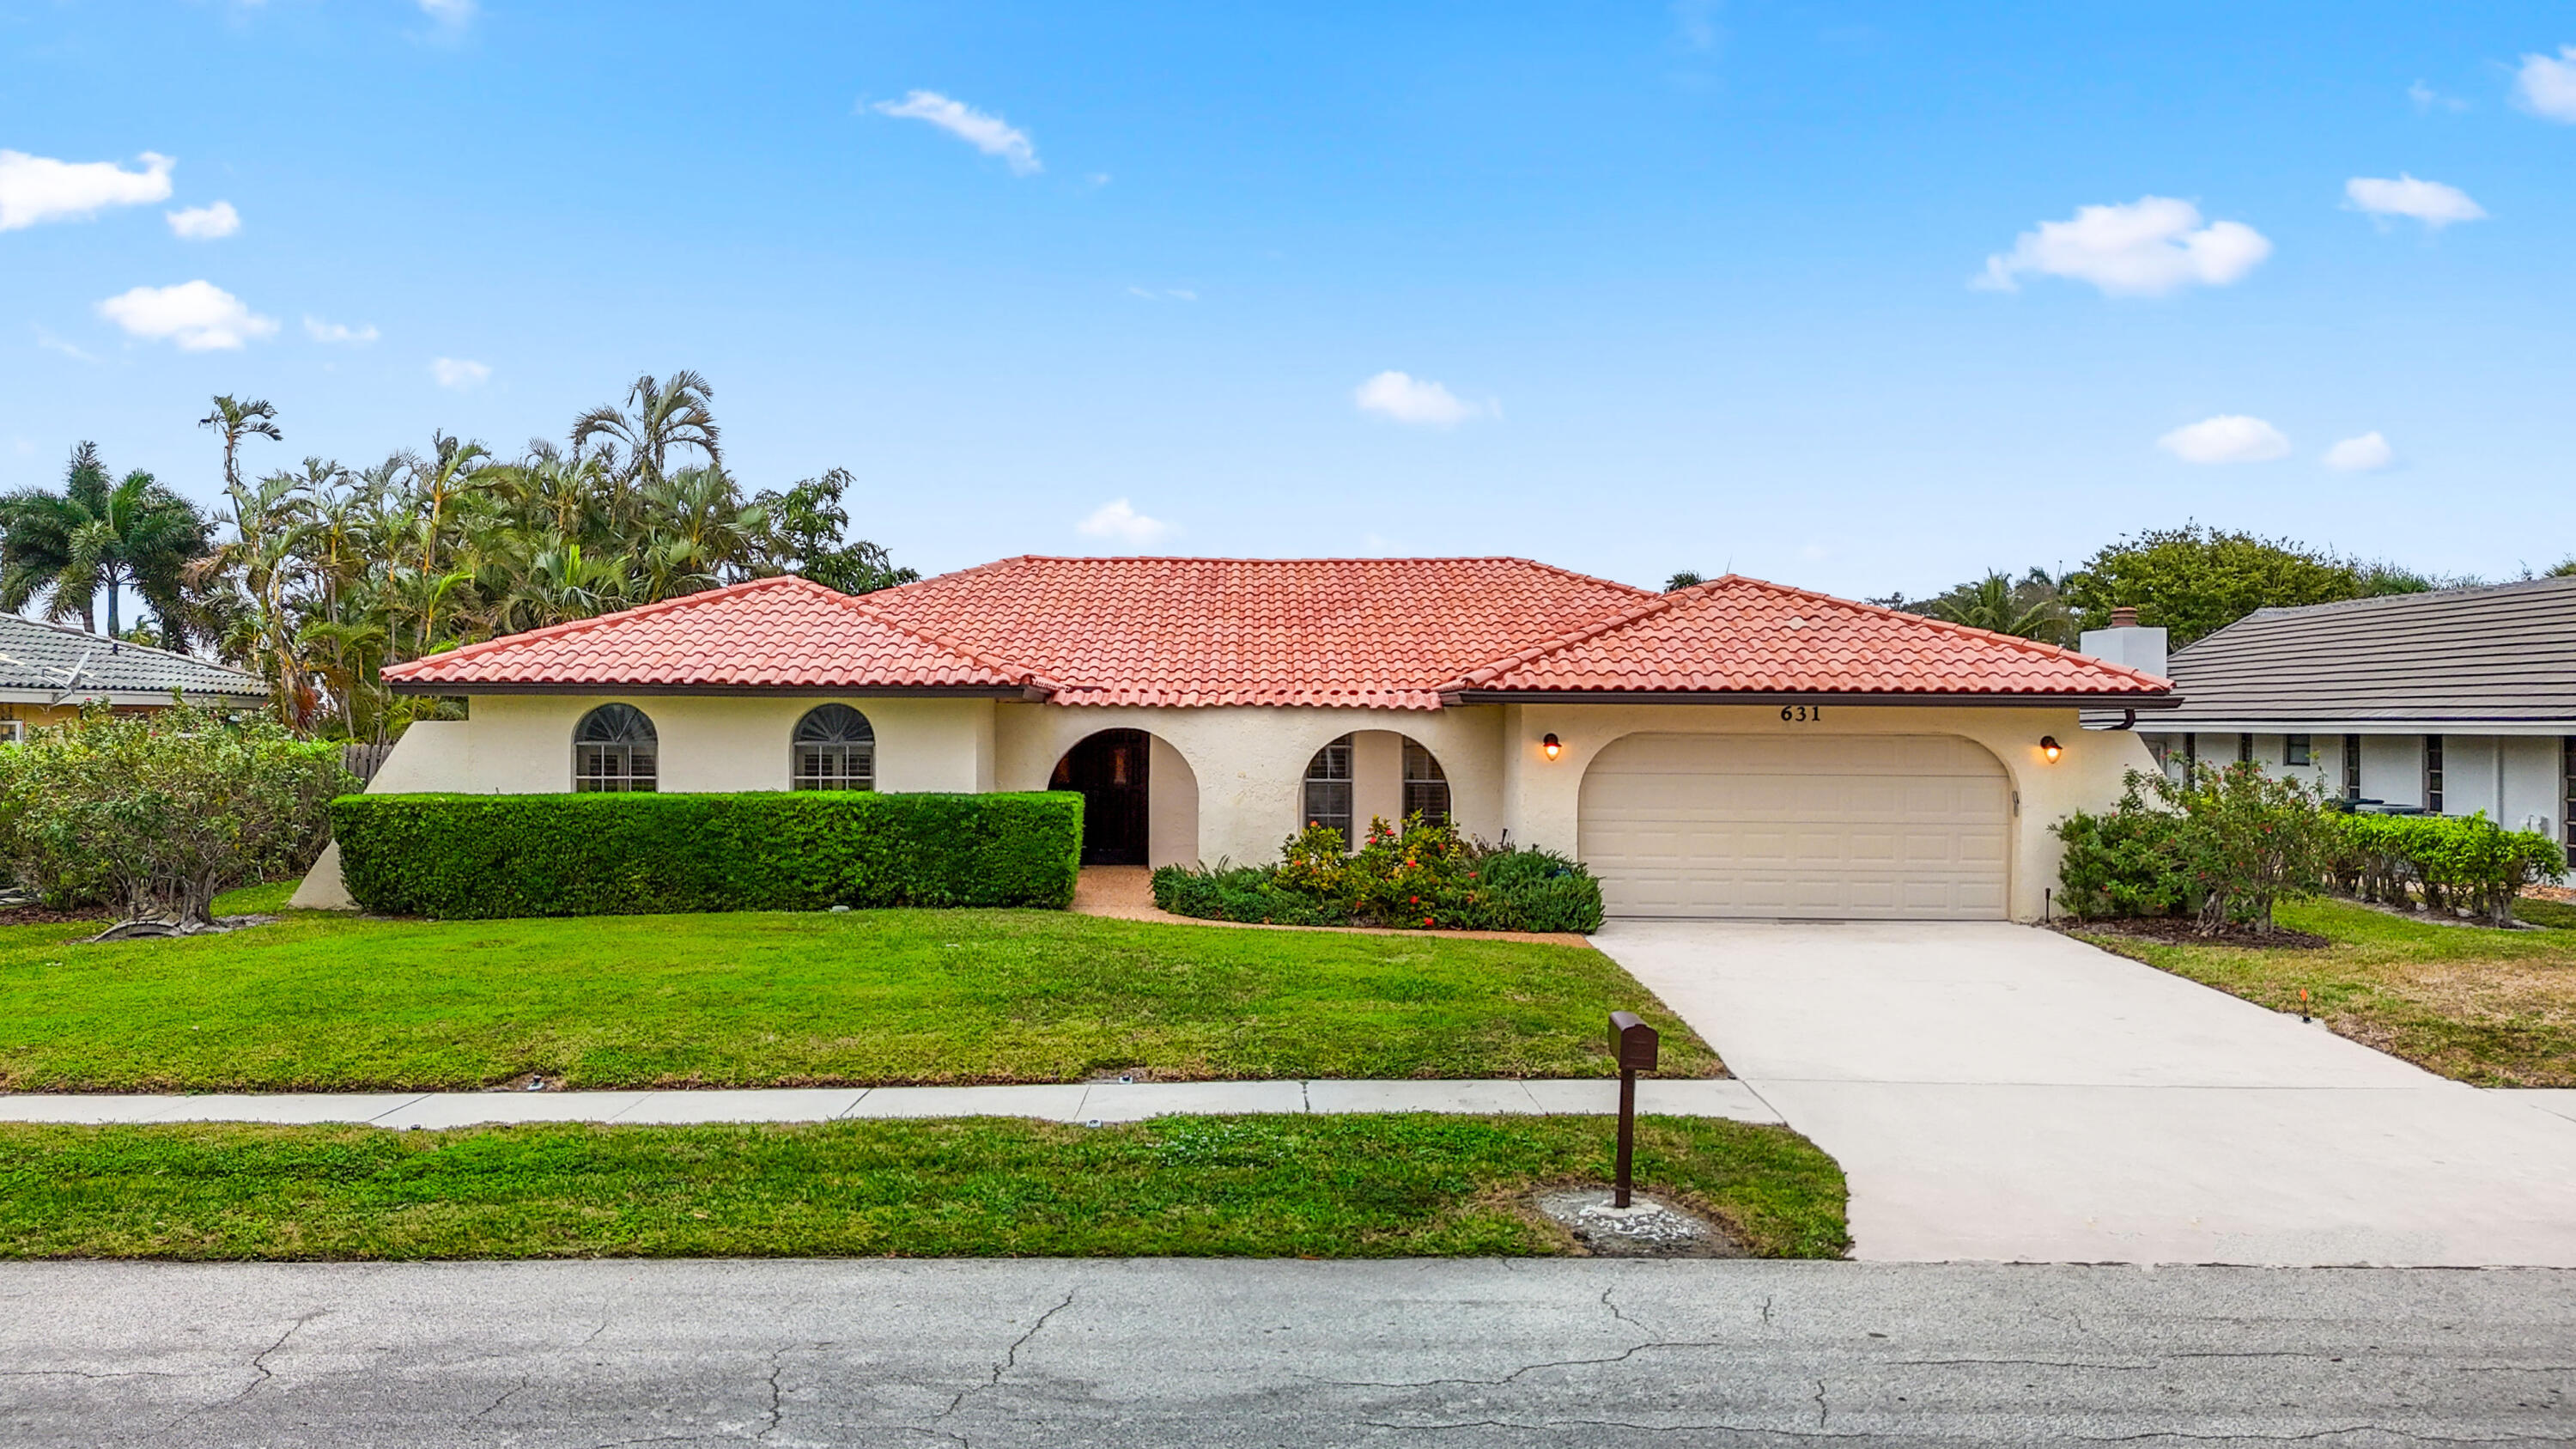 Property for Sale at 631 Carriage Hill Lane, Boca Raton, Palm Beach County, Florida - Bedrooms: 4 
Bathrooms: 2.5  - $1,245,000